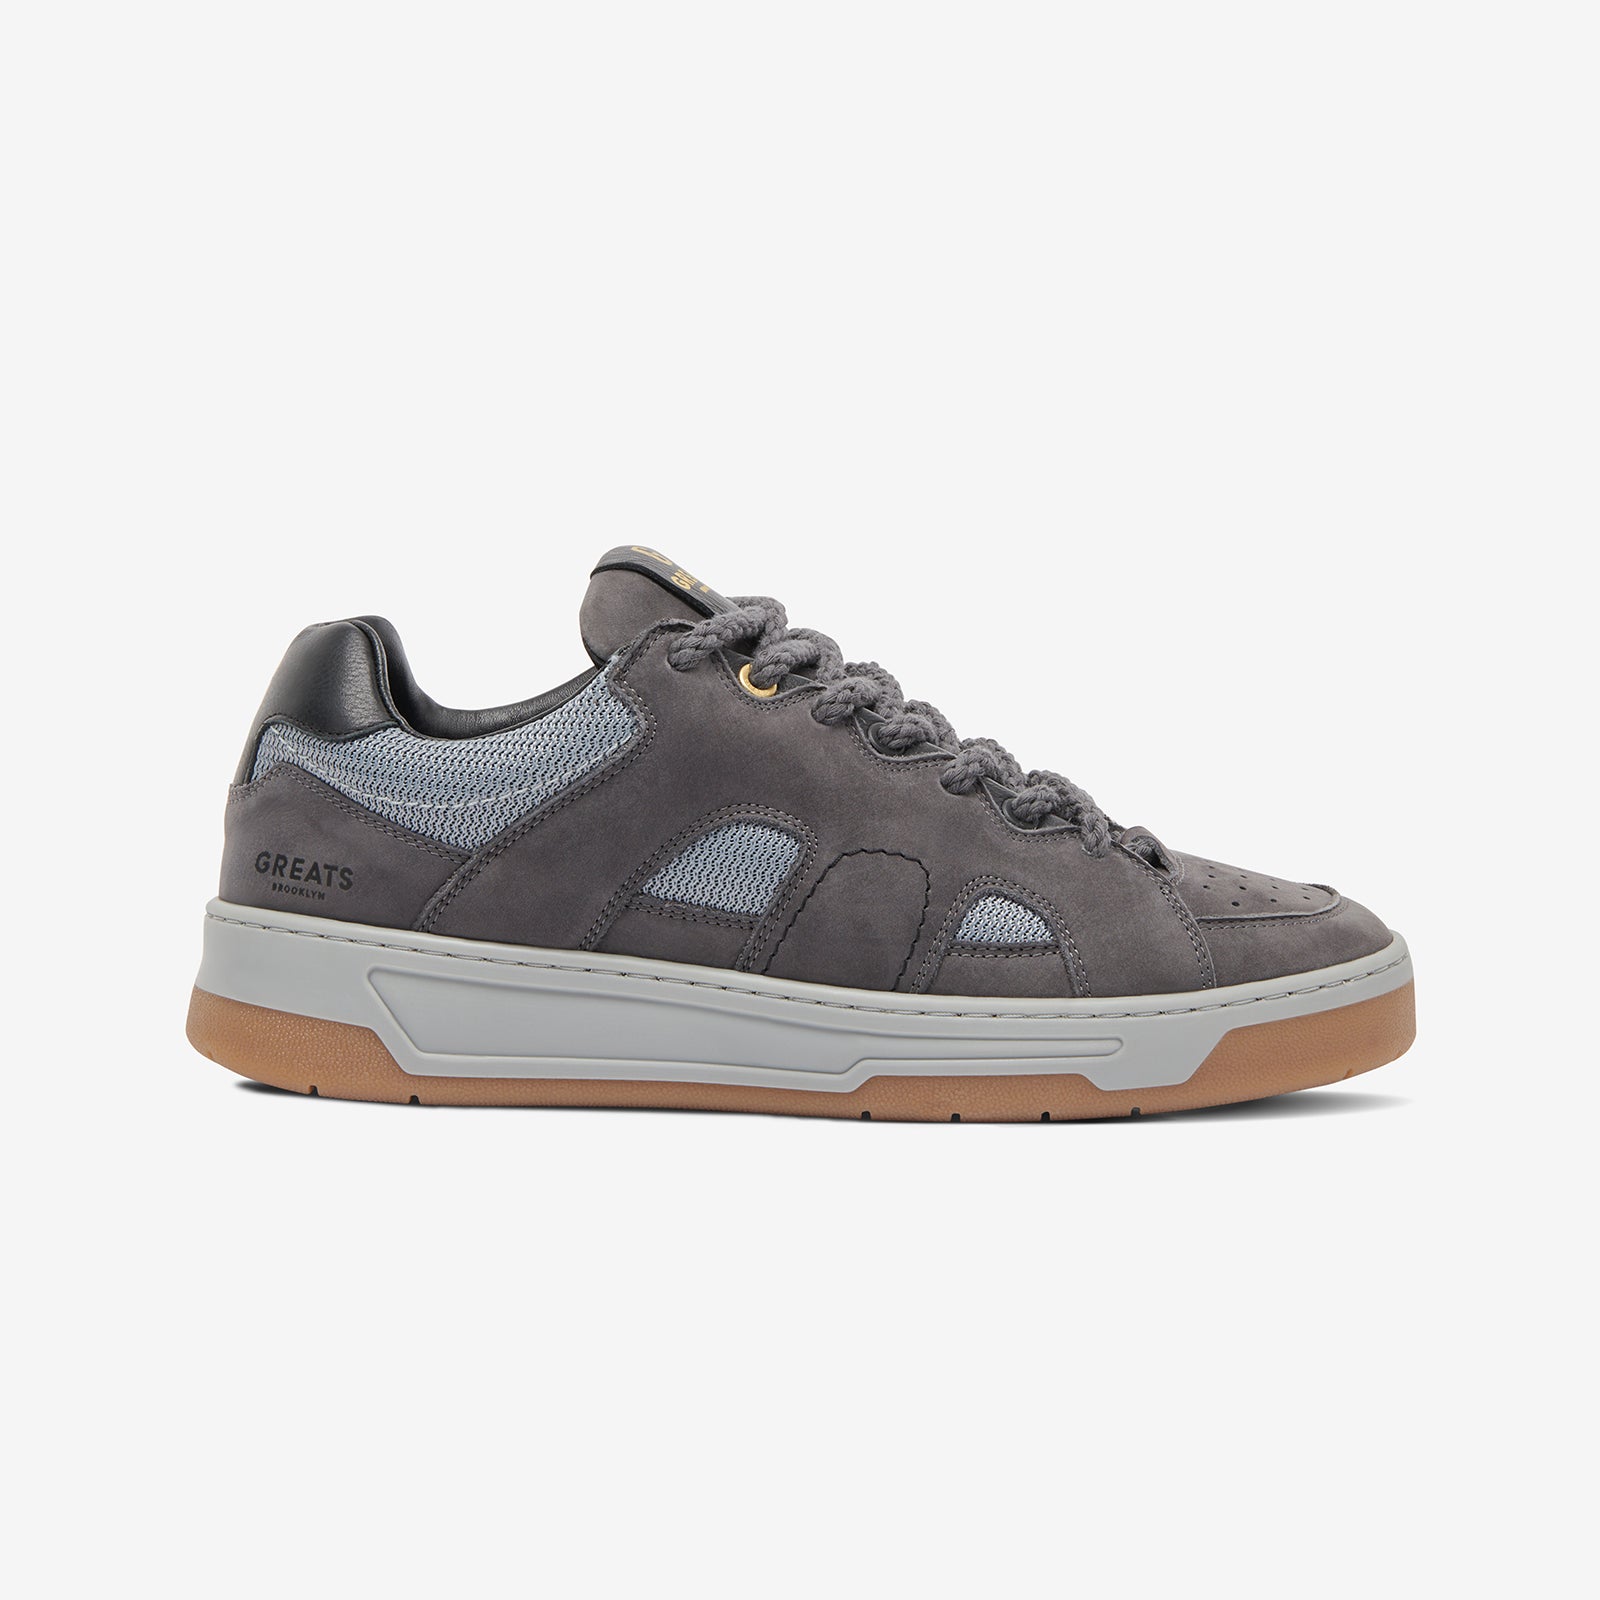 The Cooper Low Skate - Charcoal